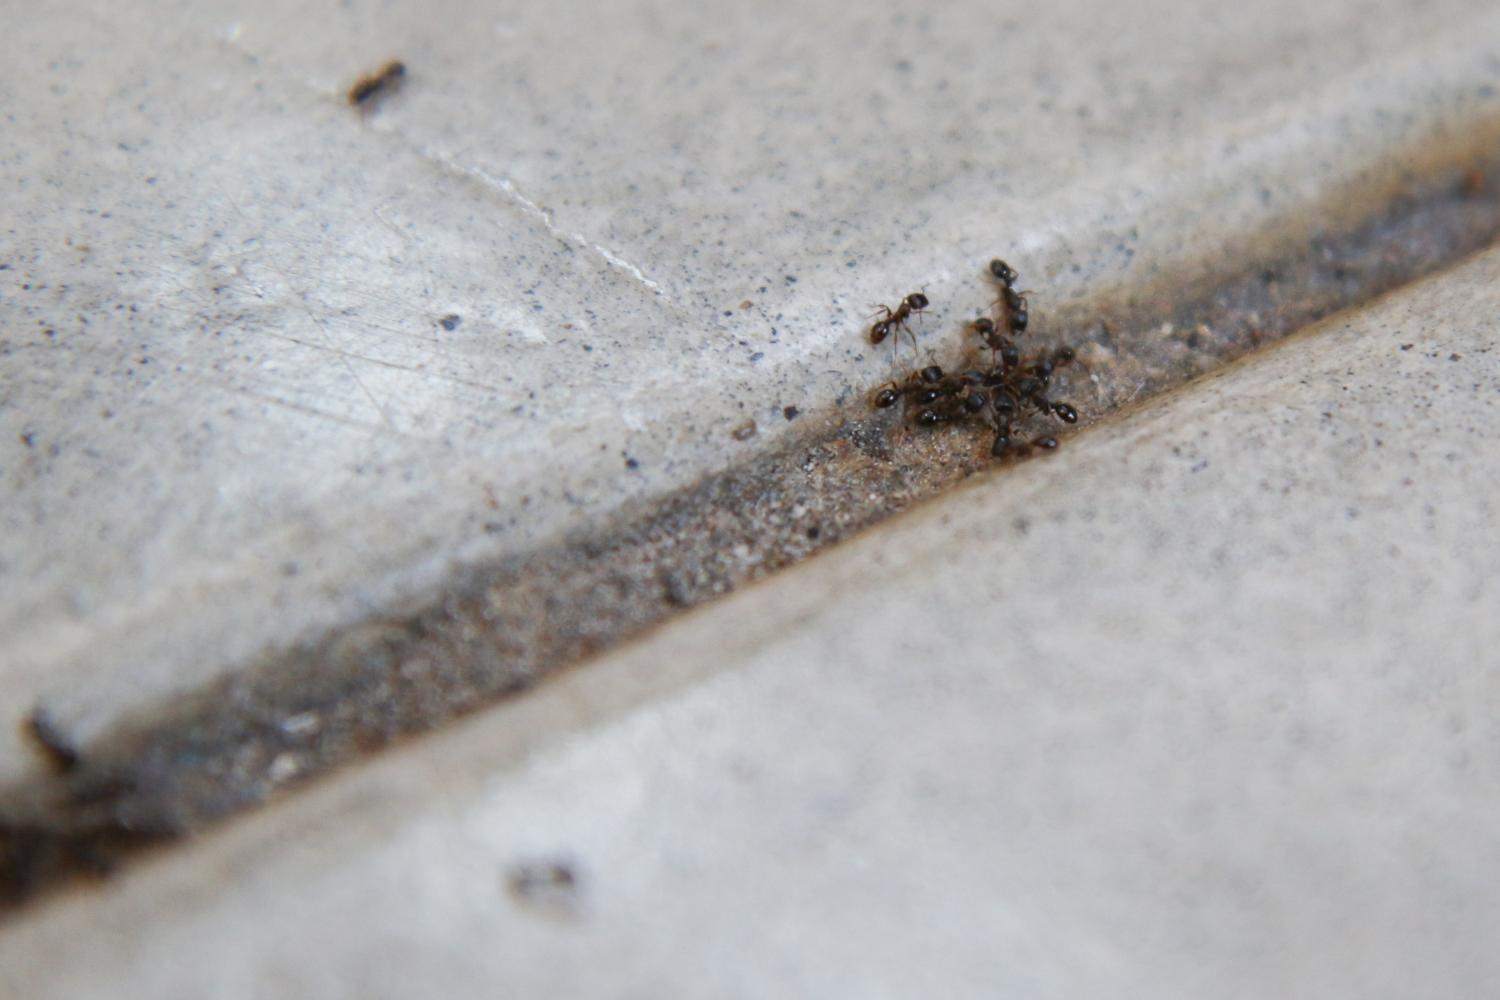 A group of ants patrolling the floor for food remains.